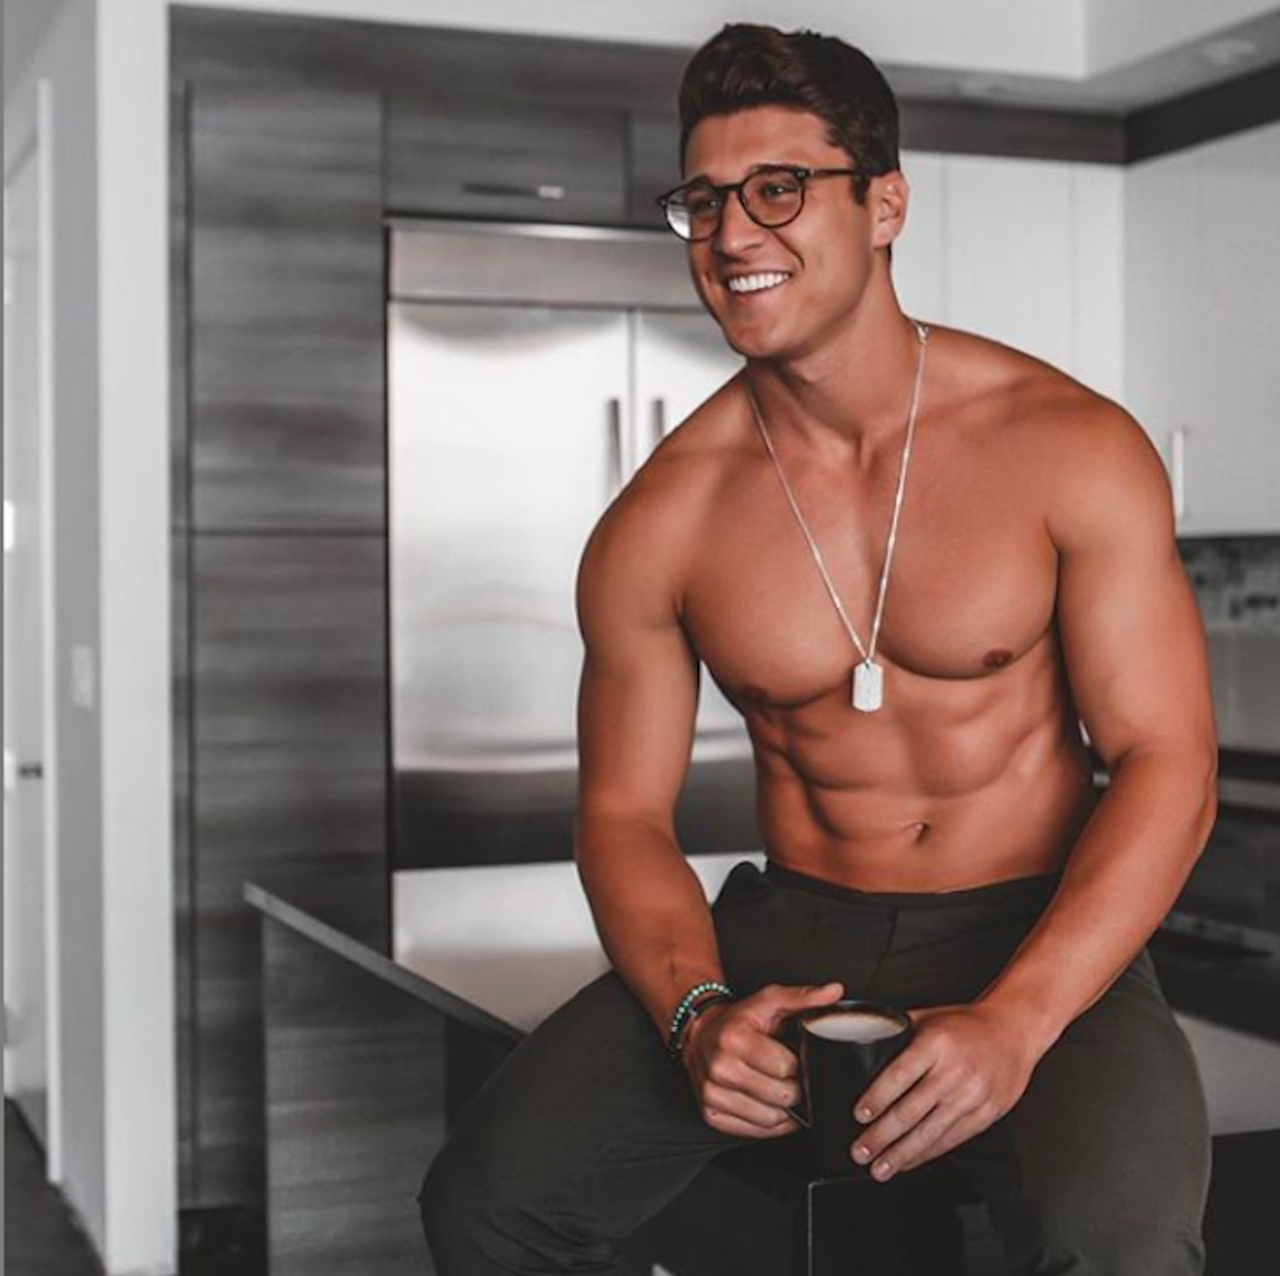 @iam_cjo
Former Bachelorette contestant, Connor Obrochta, lives among us. With a feed loaded with shirtless fake candids, this certified health and wellness trainer is worth the follow.